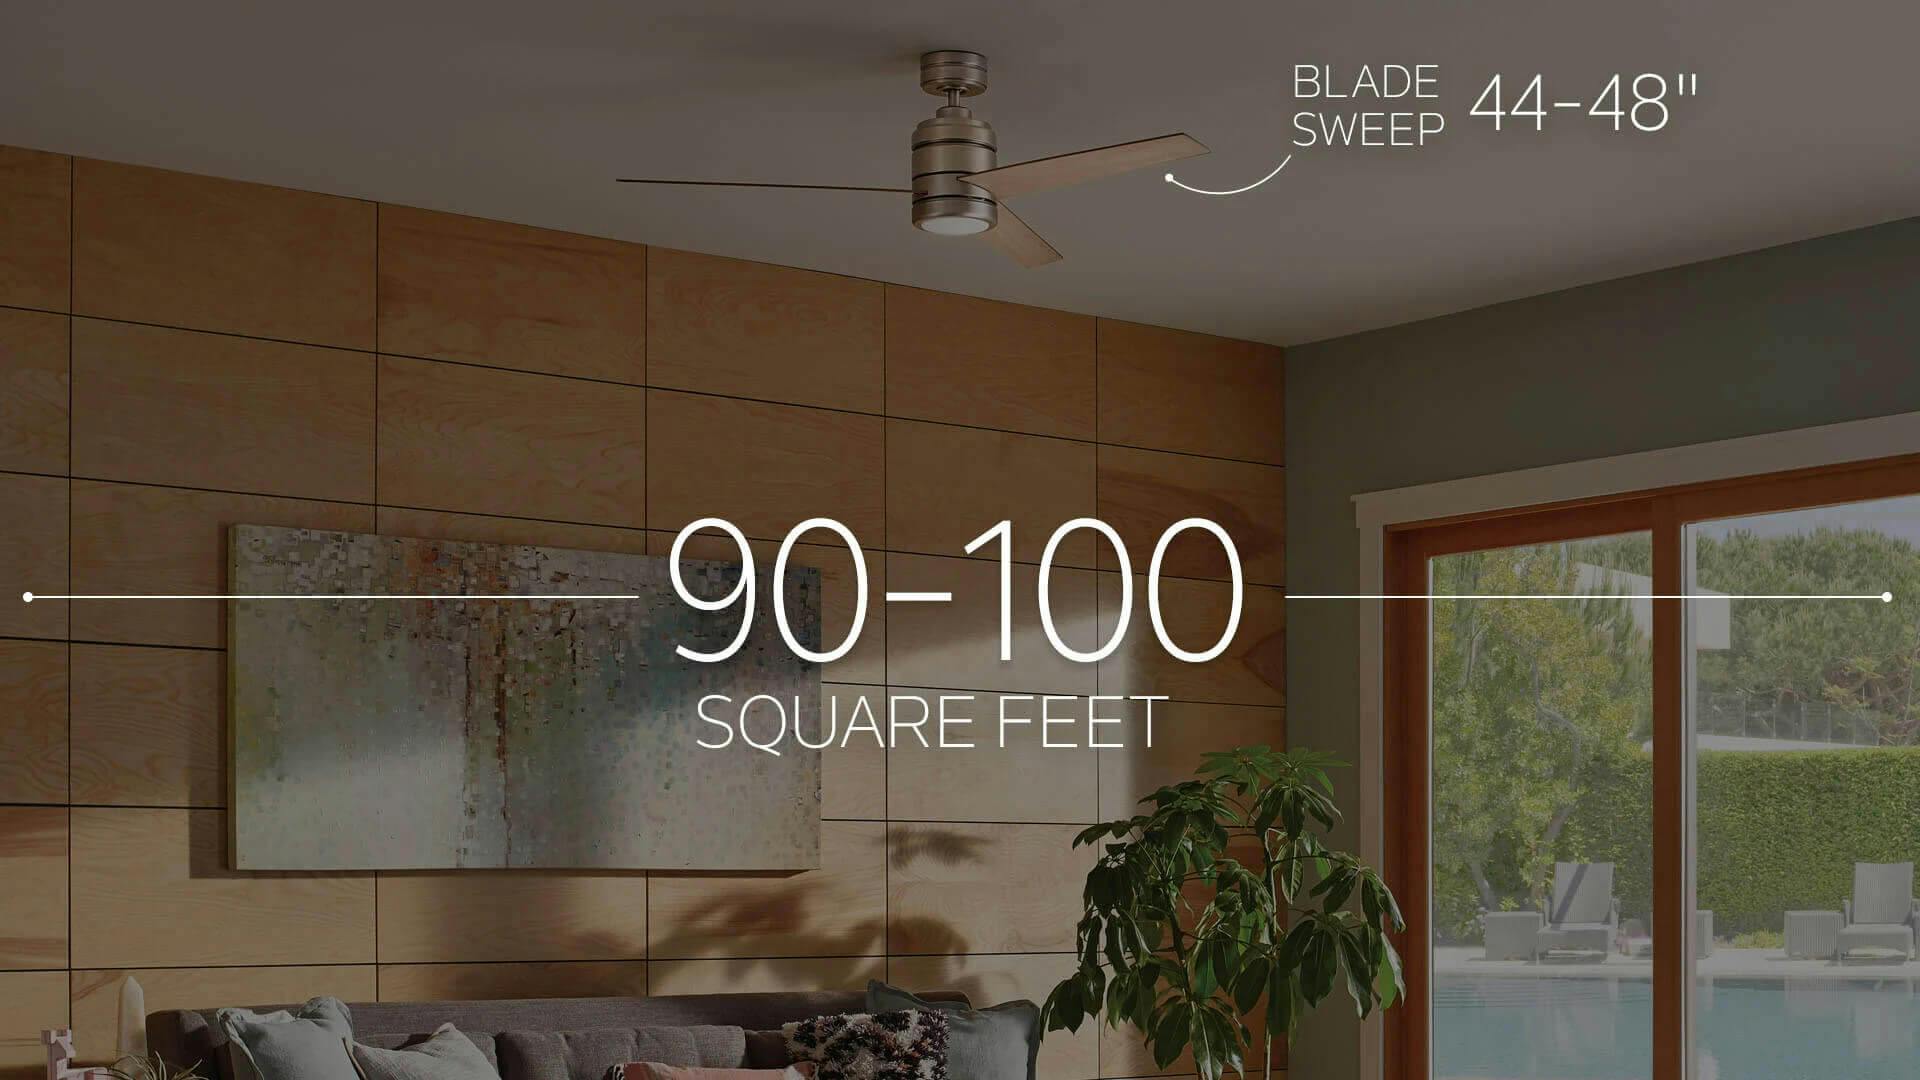 Room size example, blade sweep 44-48" in a 90-100 square feet space.